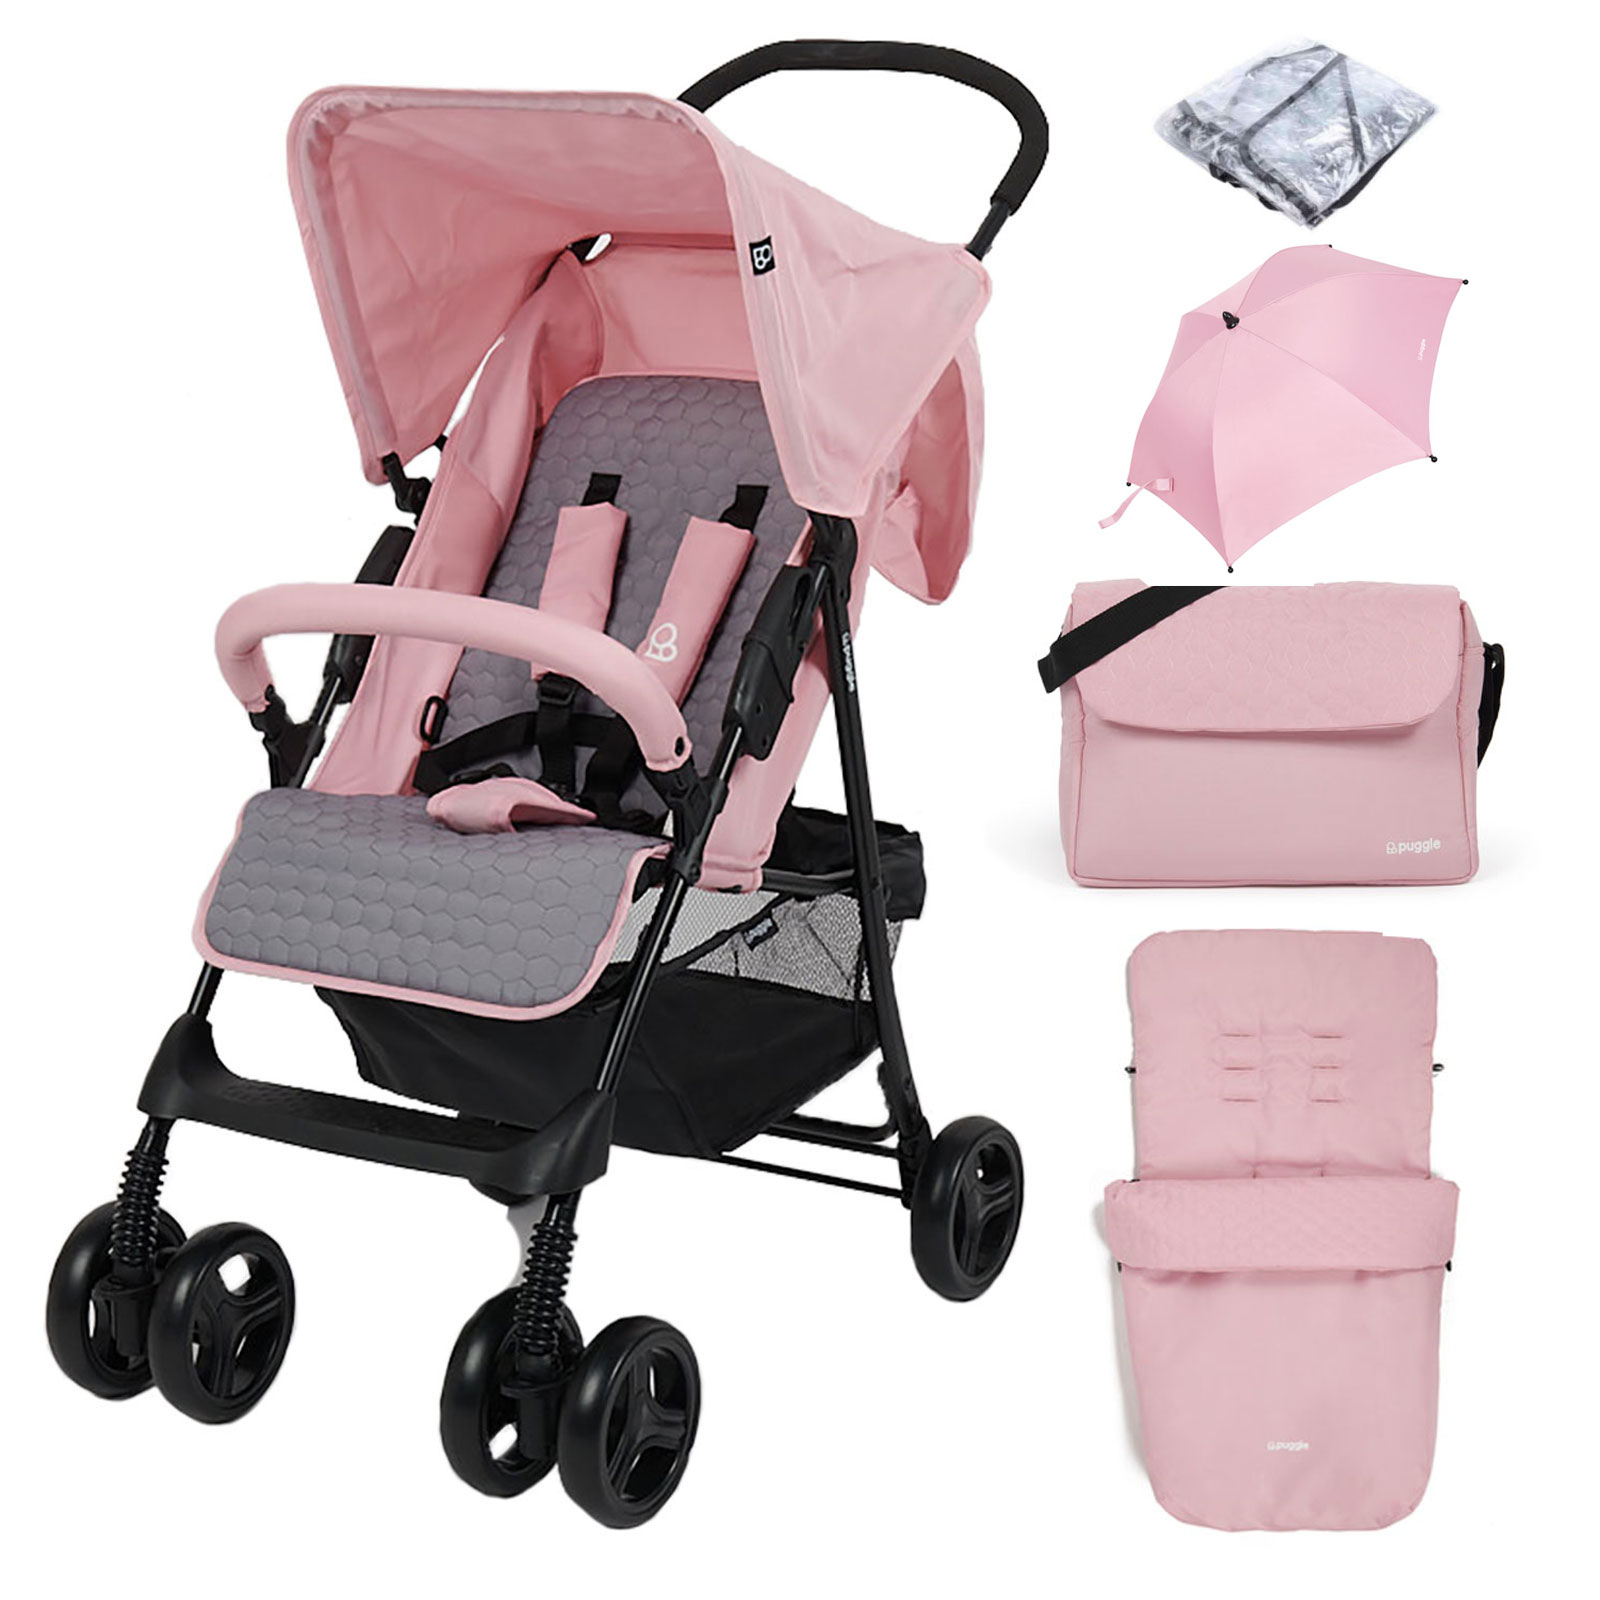 Puggle Holiday Luxe Pushchair Stroller with Raincover, Universal Footmuff, Parasol, Changing Bag and Mat - Vintage Pink